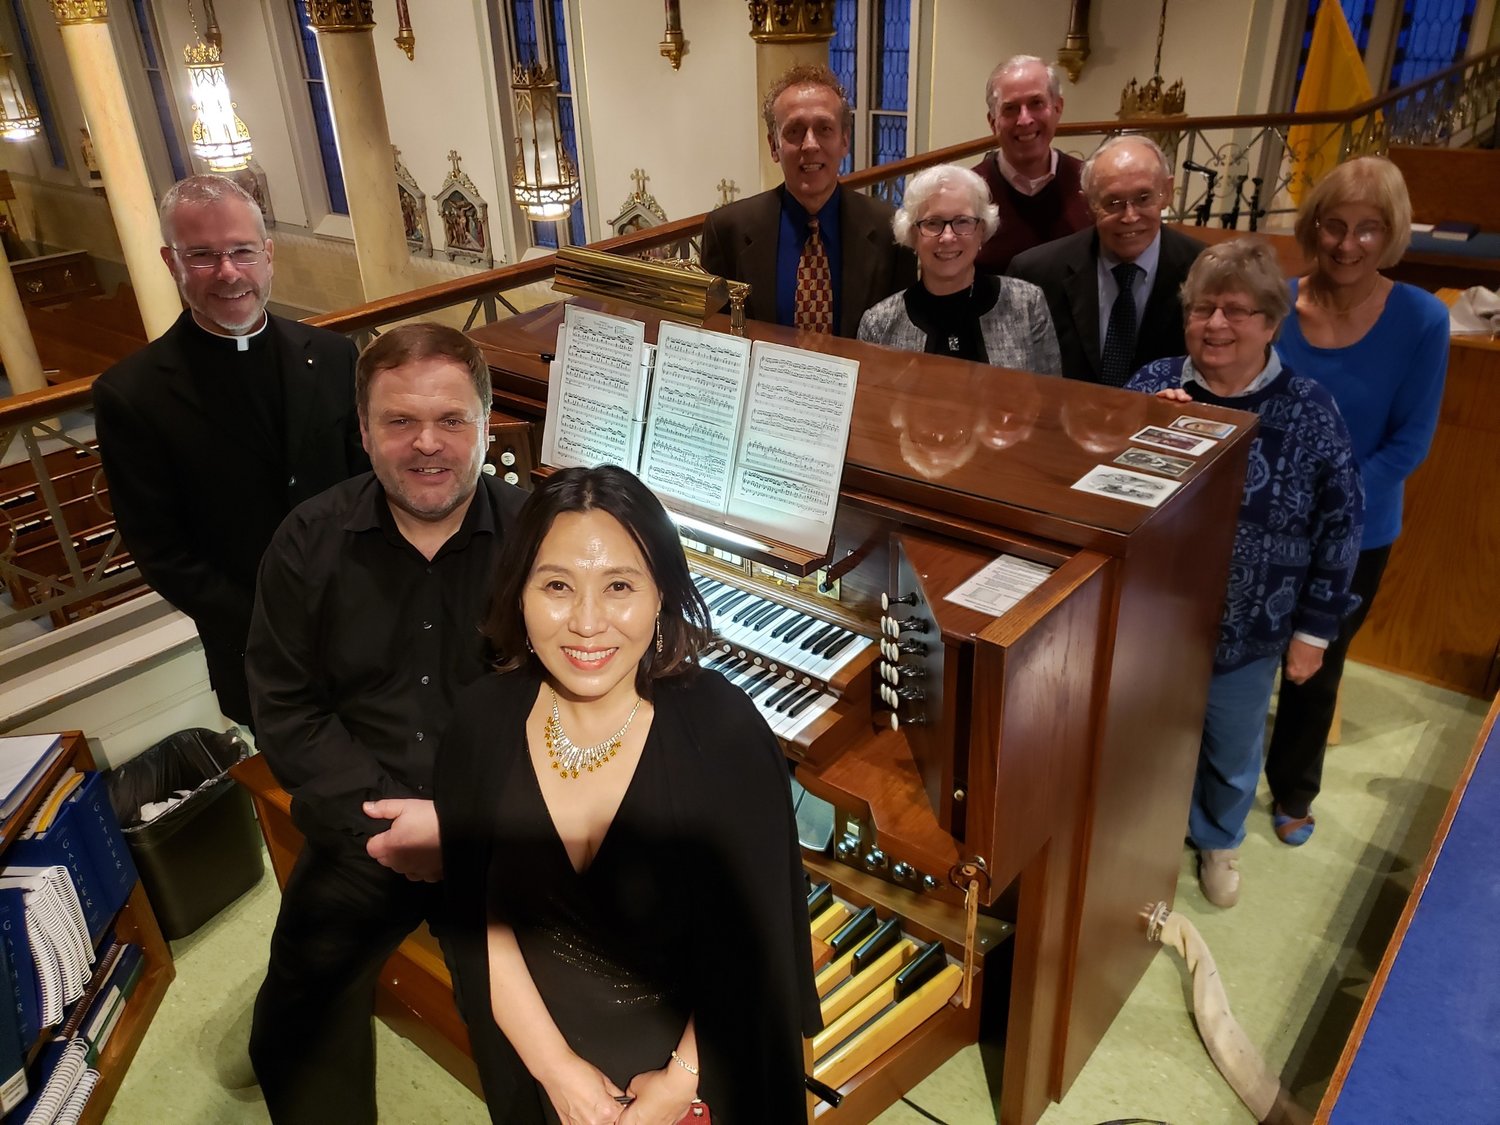 Father Jeremy Secrist, visiting organist Horst Buchholz, visiting vocal soloist MeeAe Cecilia Nam and members of the local American Guild of Organists chapter stand next to the organ console in the choir loft of St. Peter Church in Jefferson City, following an Oct. 20 public concert of music for organ and voice.